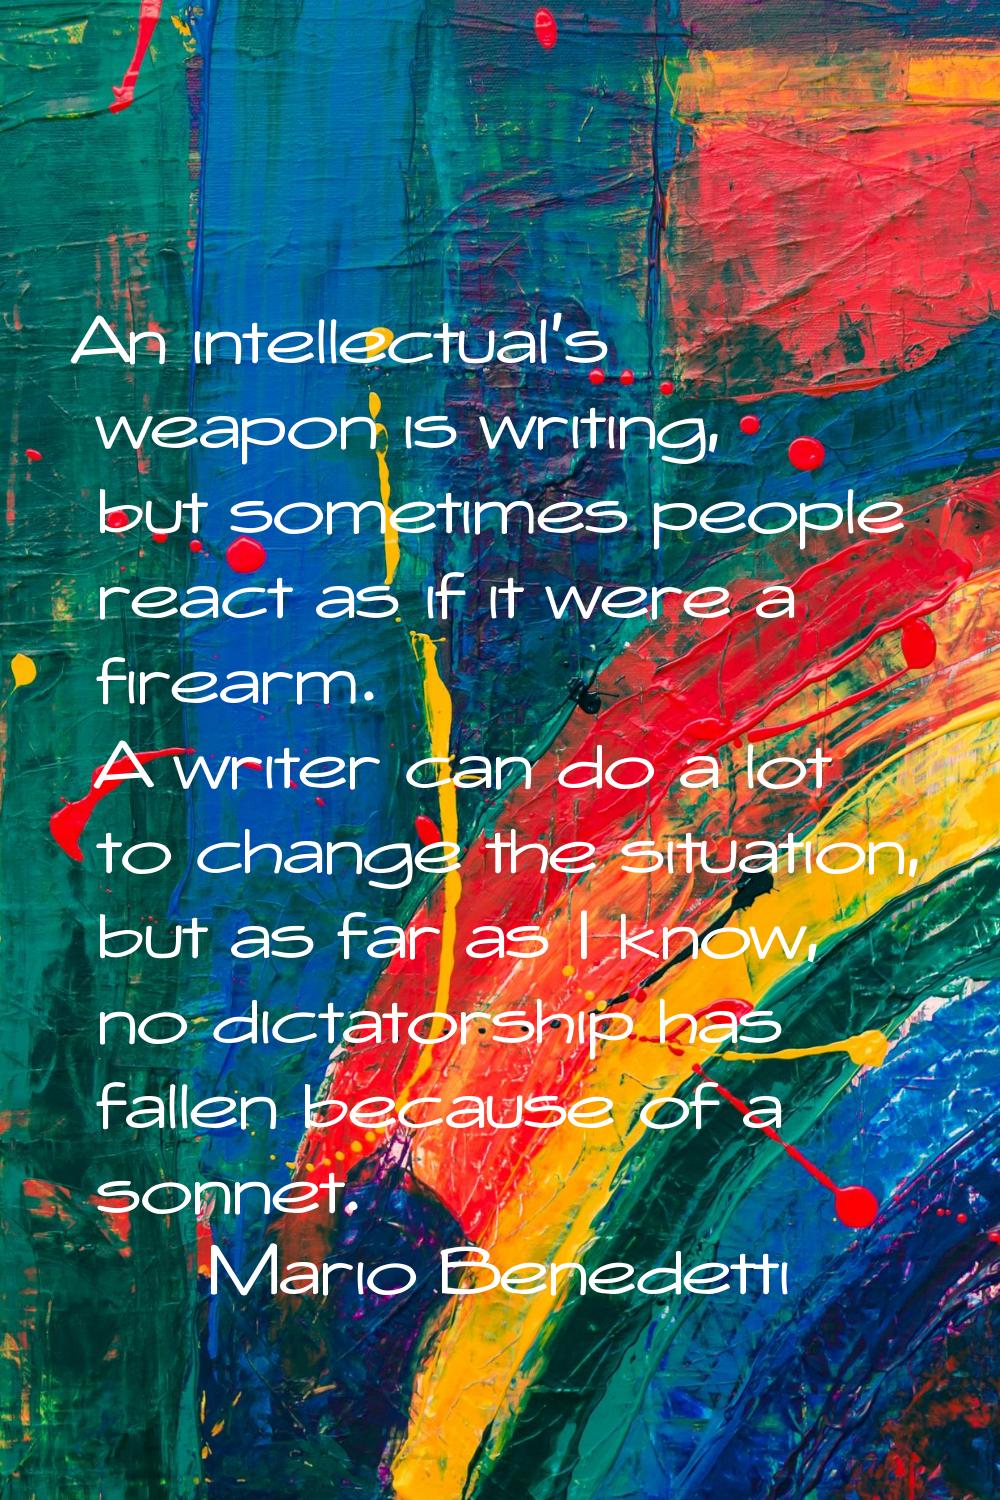 An intellectual's weapon is writing, but sometimes people react as if it were a firearm. A writer c